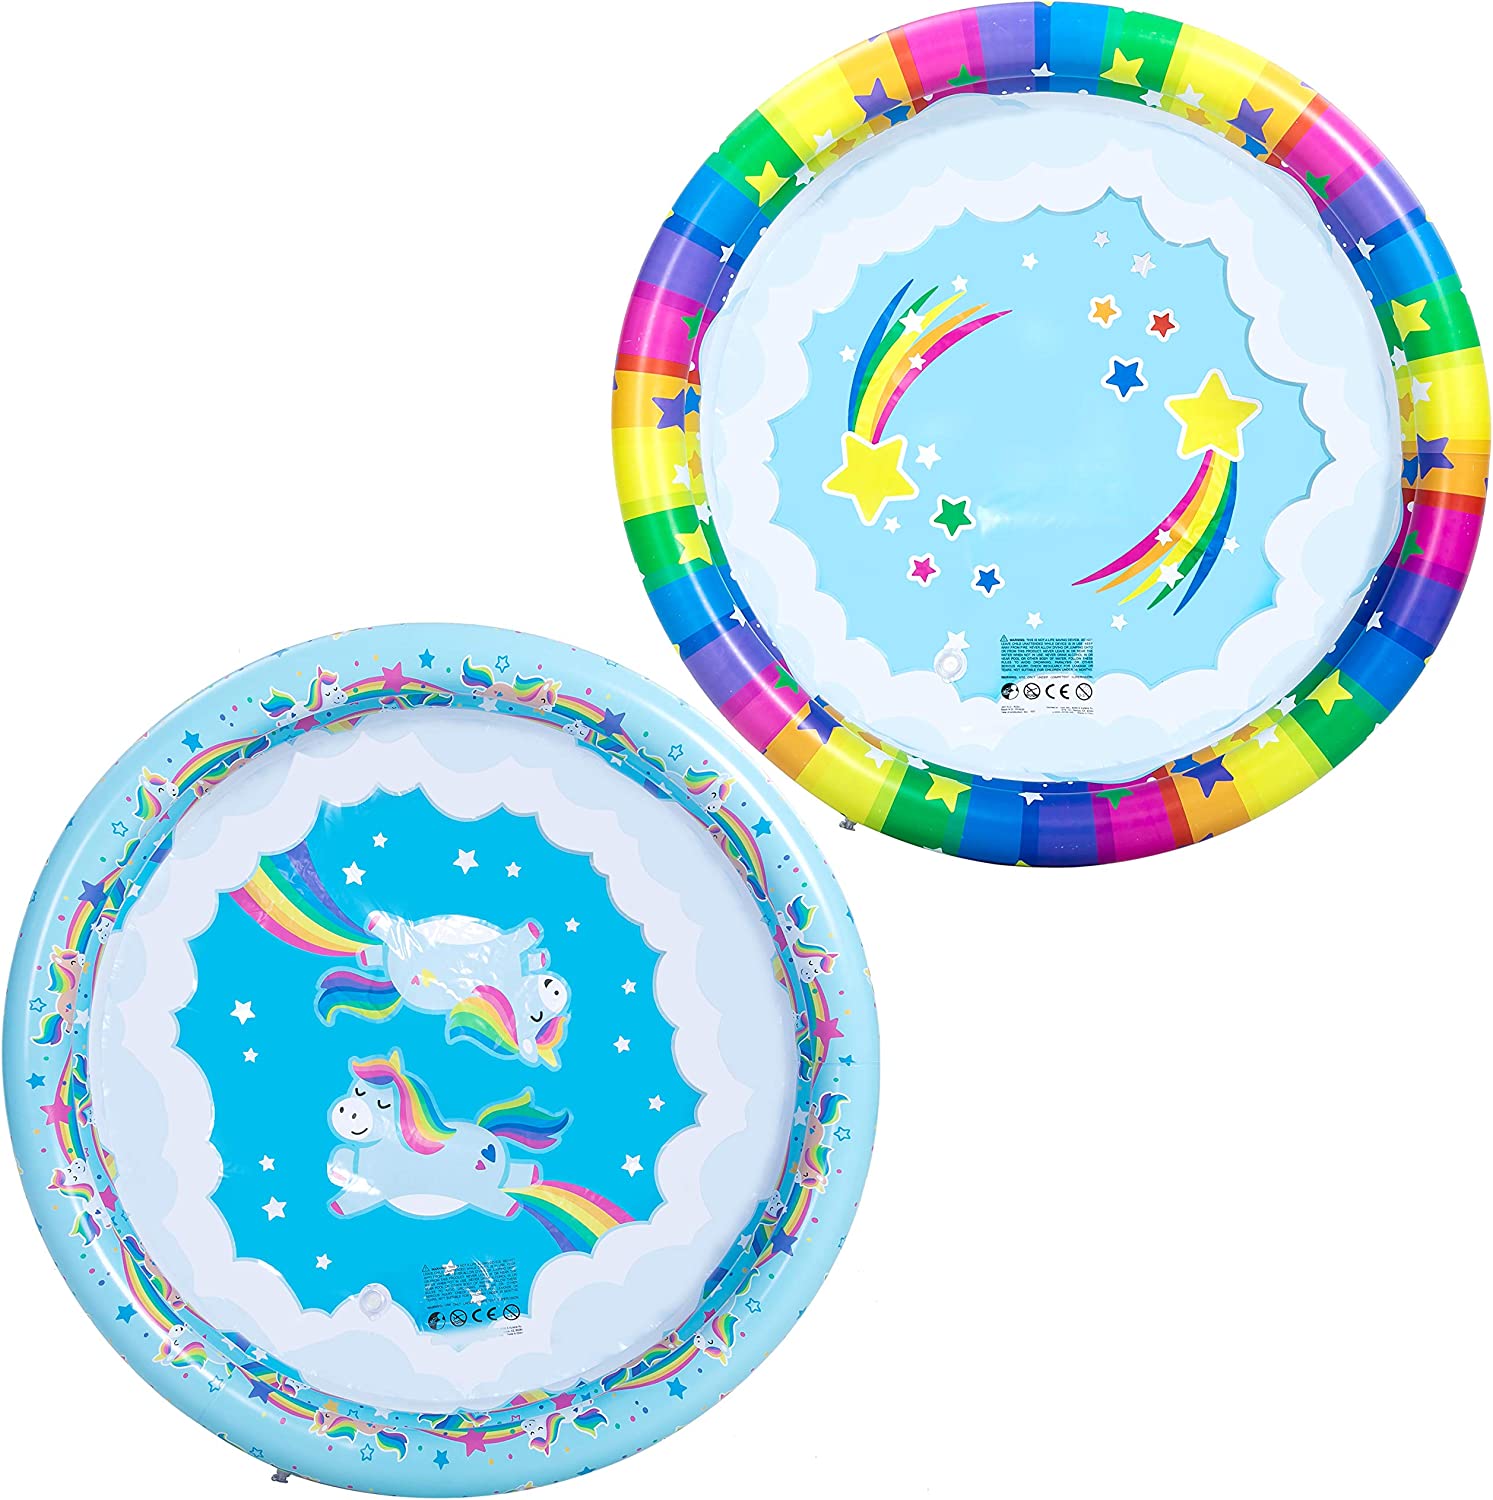 2 Pack 45'' Unicorn Rainbow & Rainbow Inflatable Kiddie Pool Set, Family Swimming Pool Water Pool Pit Ball Pool for Kids Toddler Indoor Outdoor Summer Fun